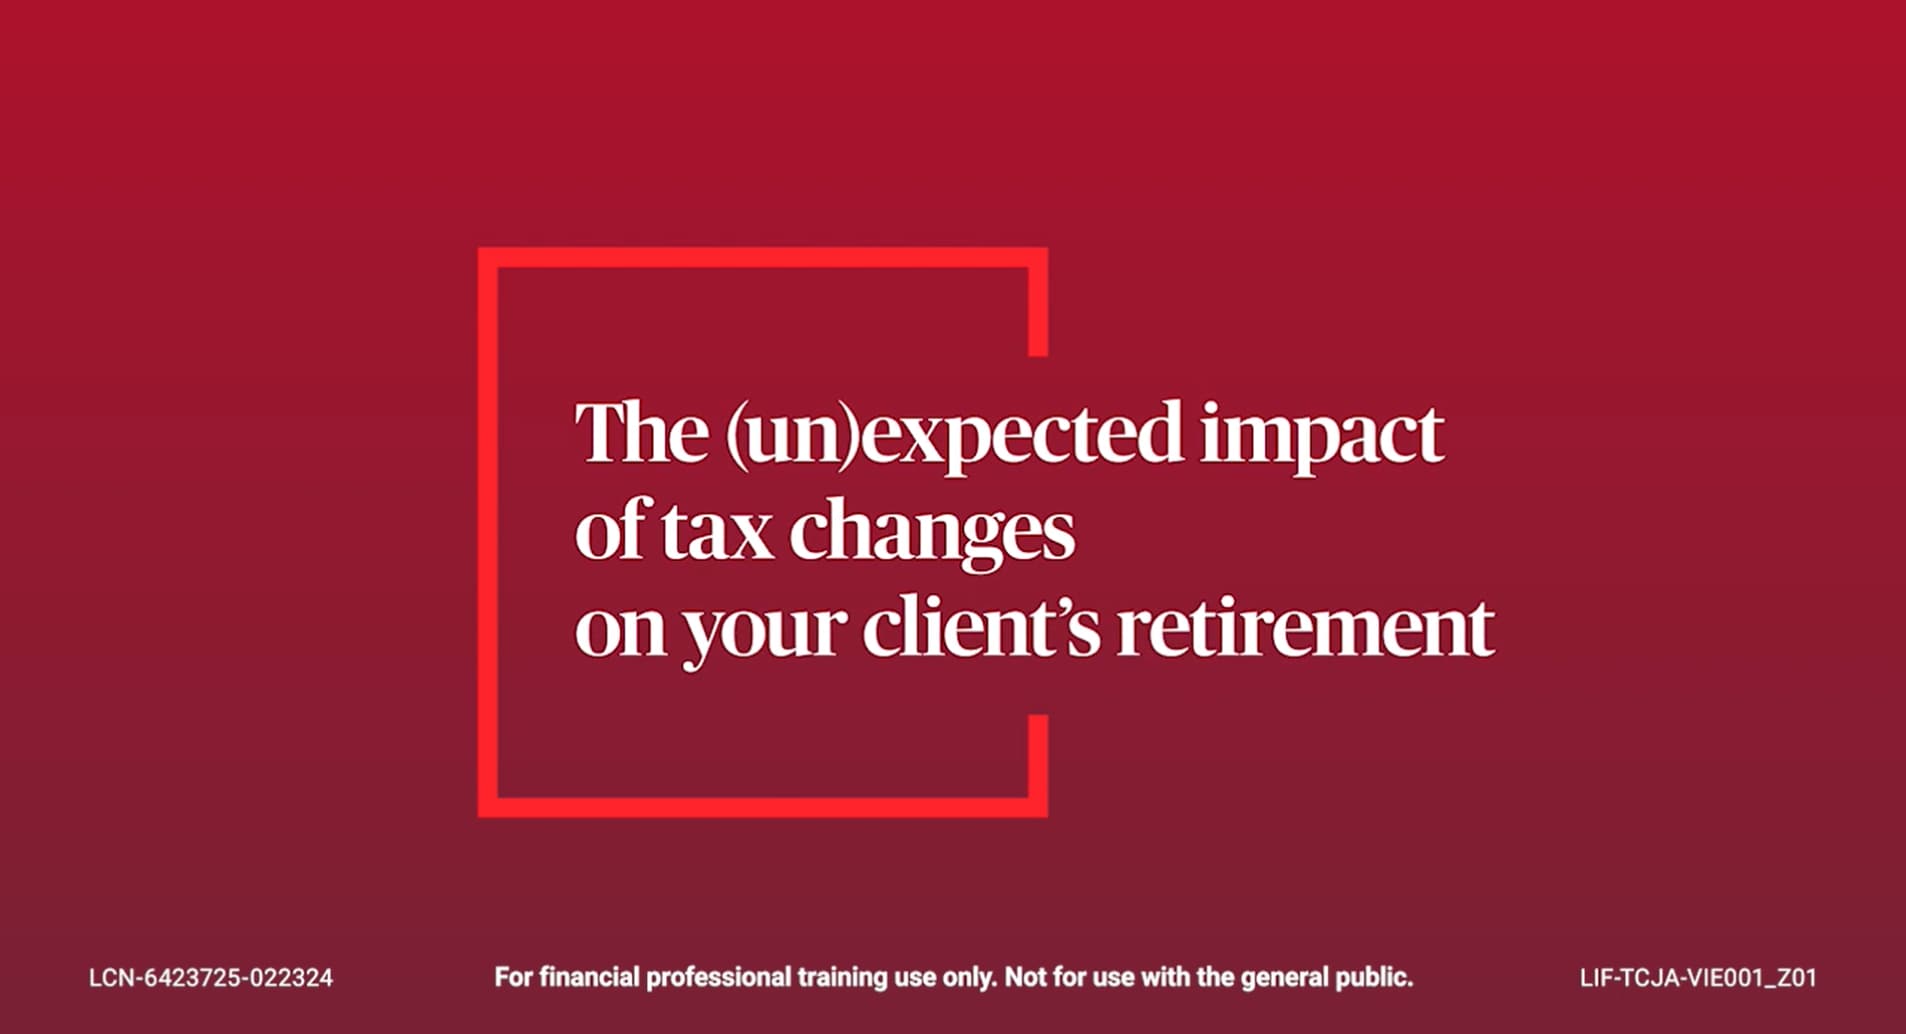 The (un)expected impact of tax changes on your client’s retirement